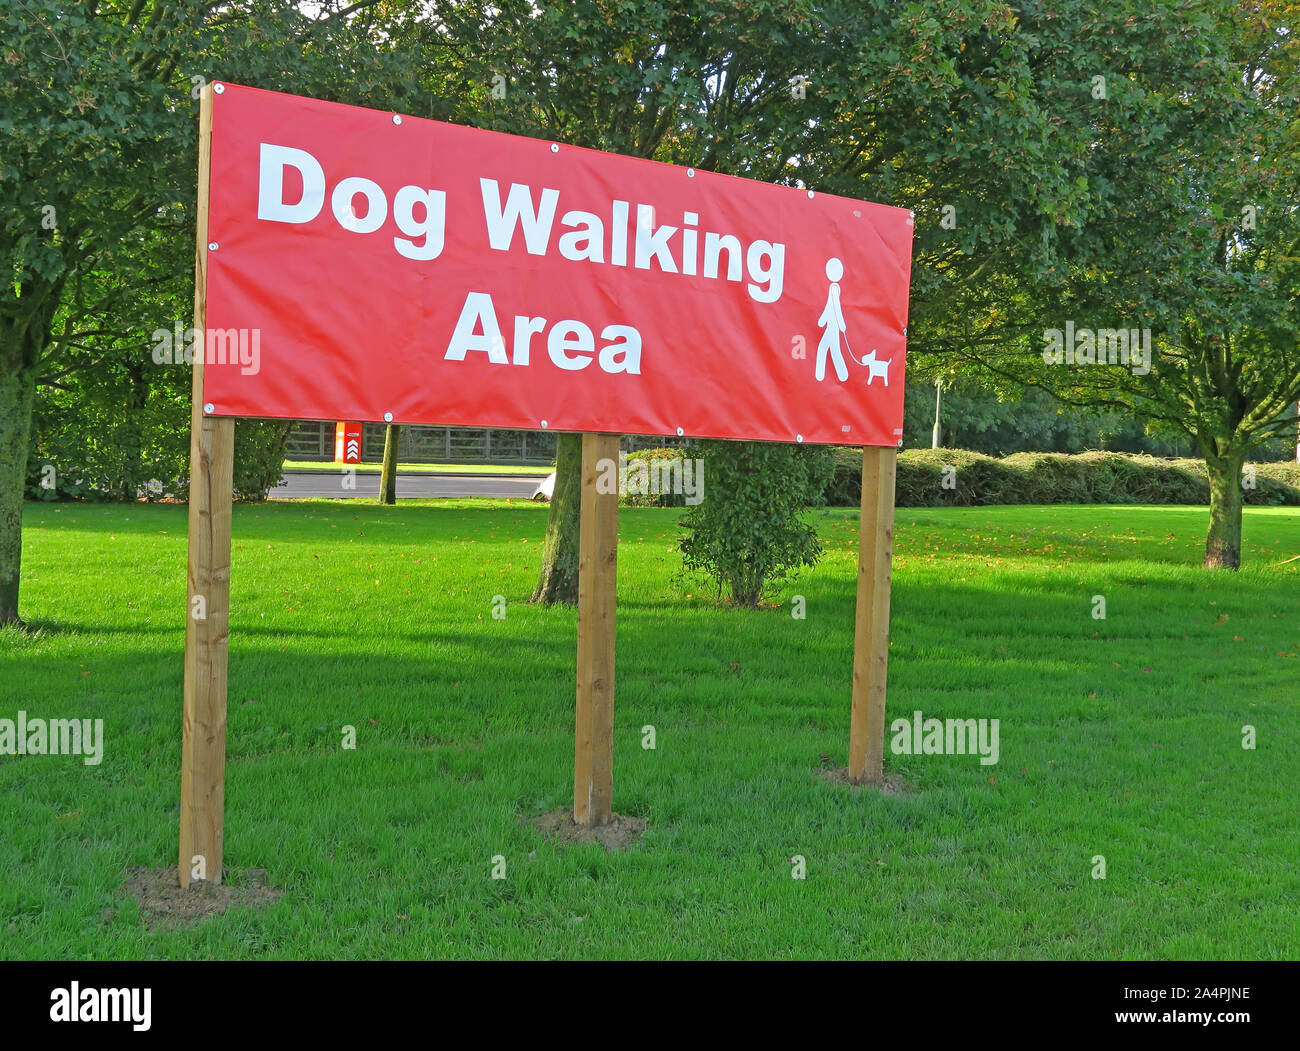 Special Dog Walking Area, M5 Strensham Services, Worcestershire, grass lawn and red sign Stock Photo